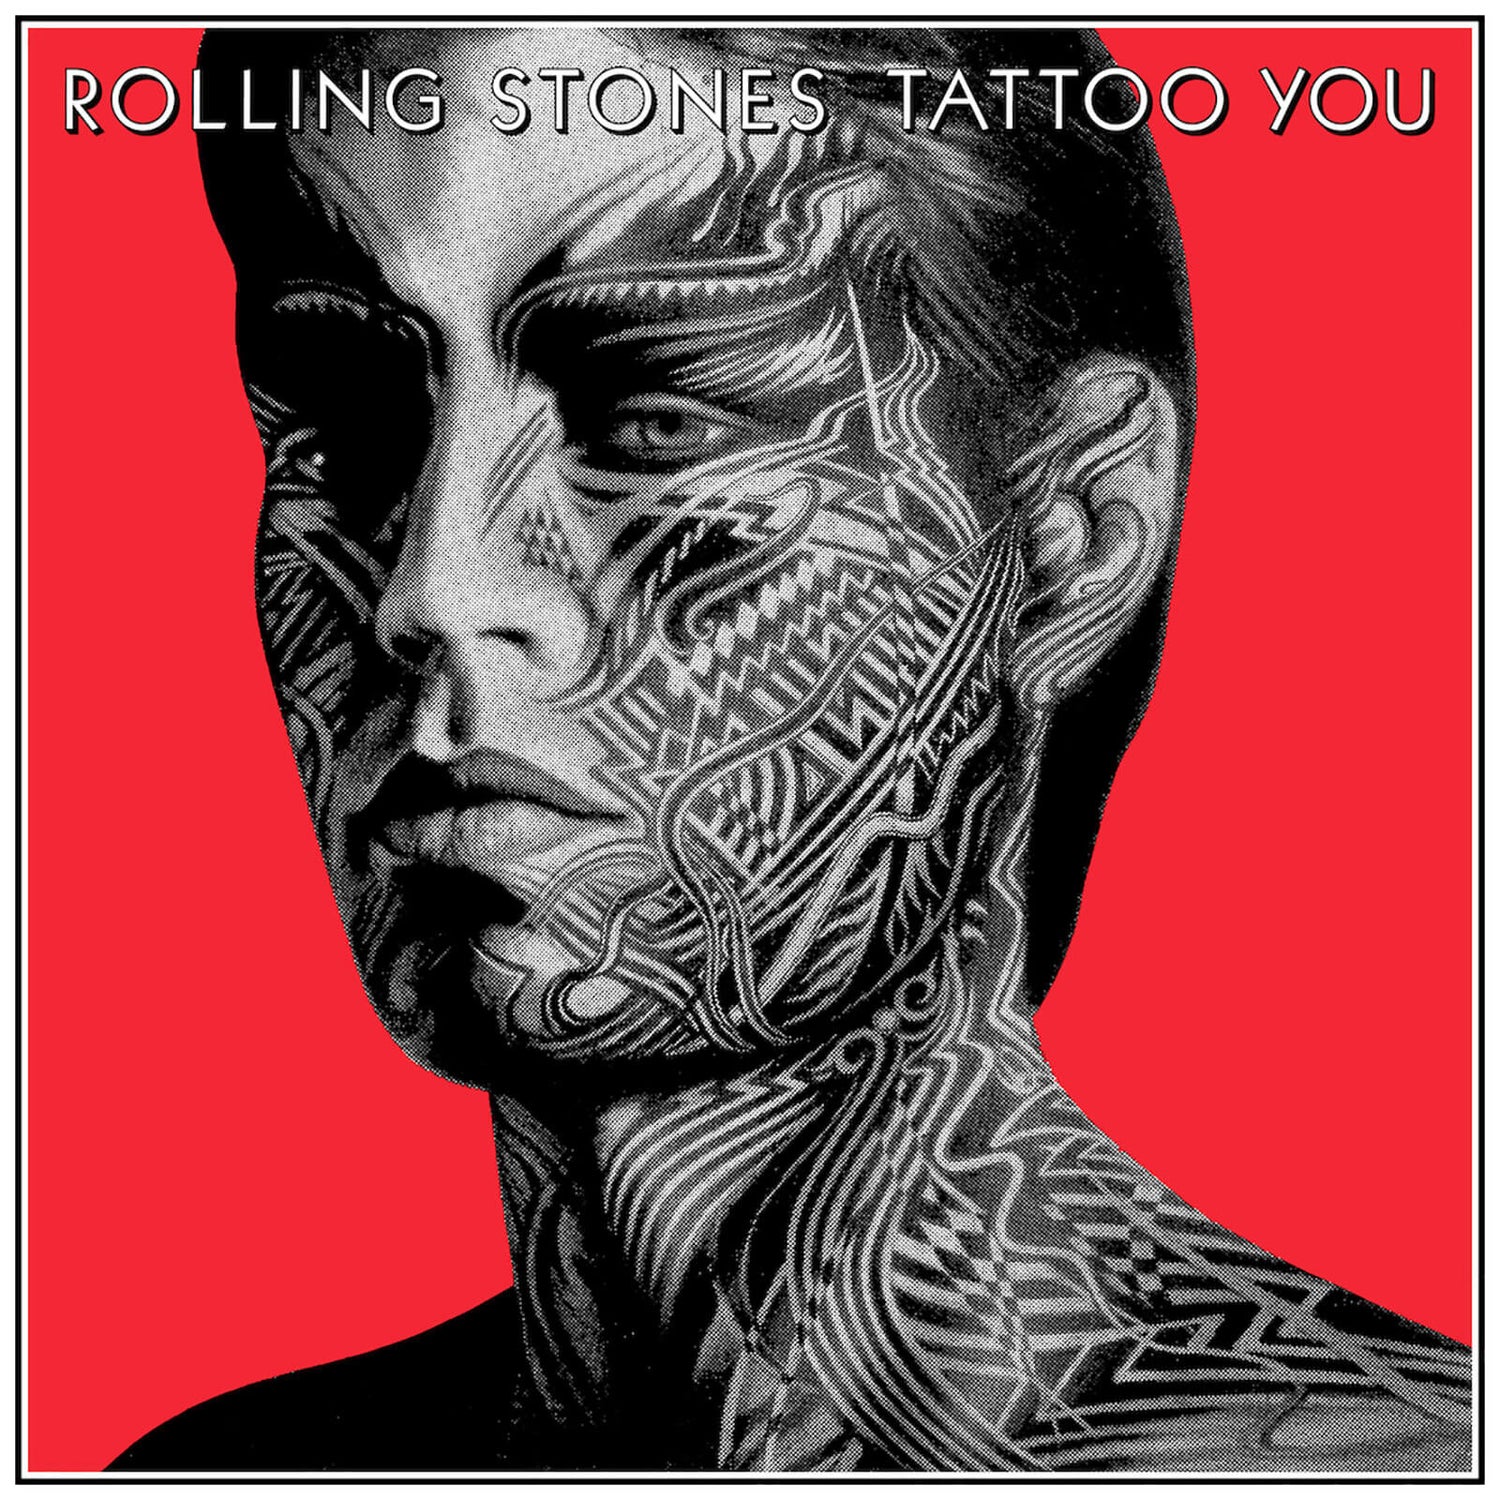 The Rolling Stones - Tattoo You Vinyl